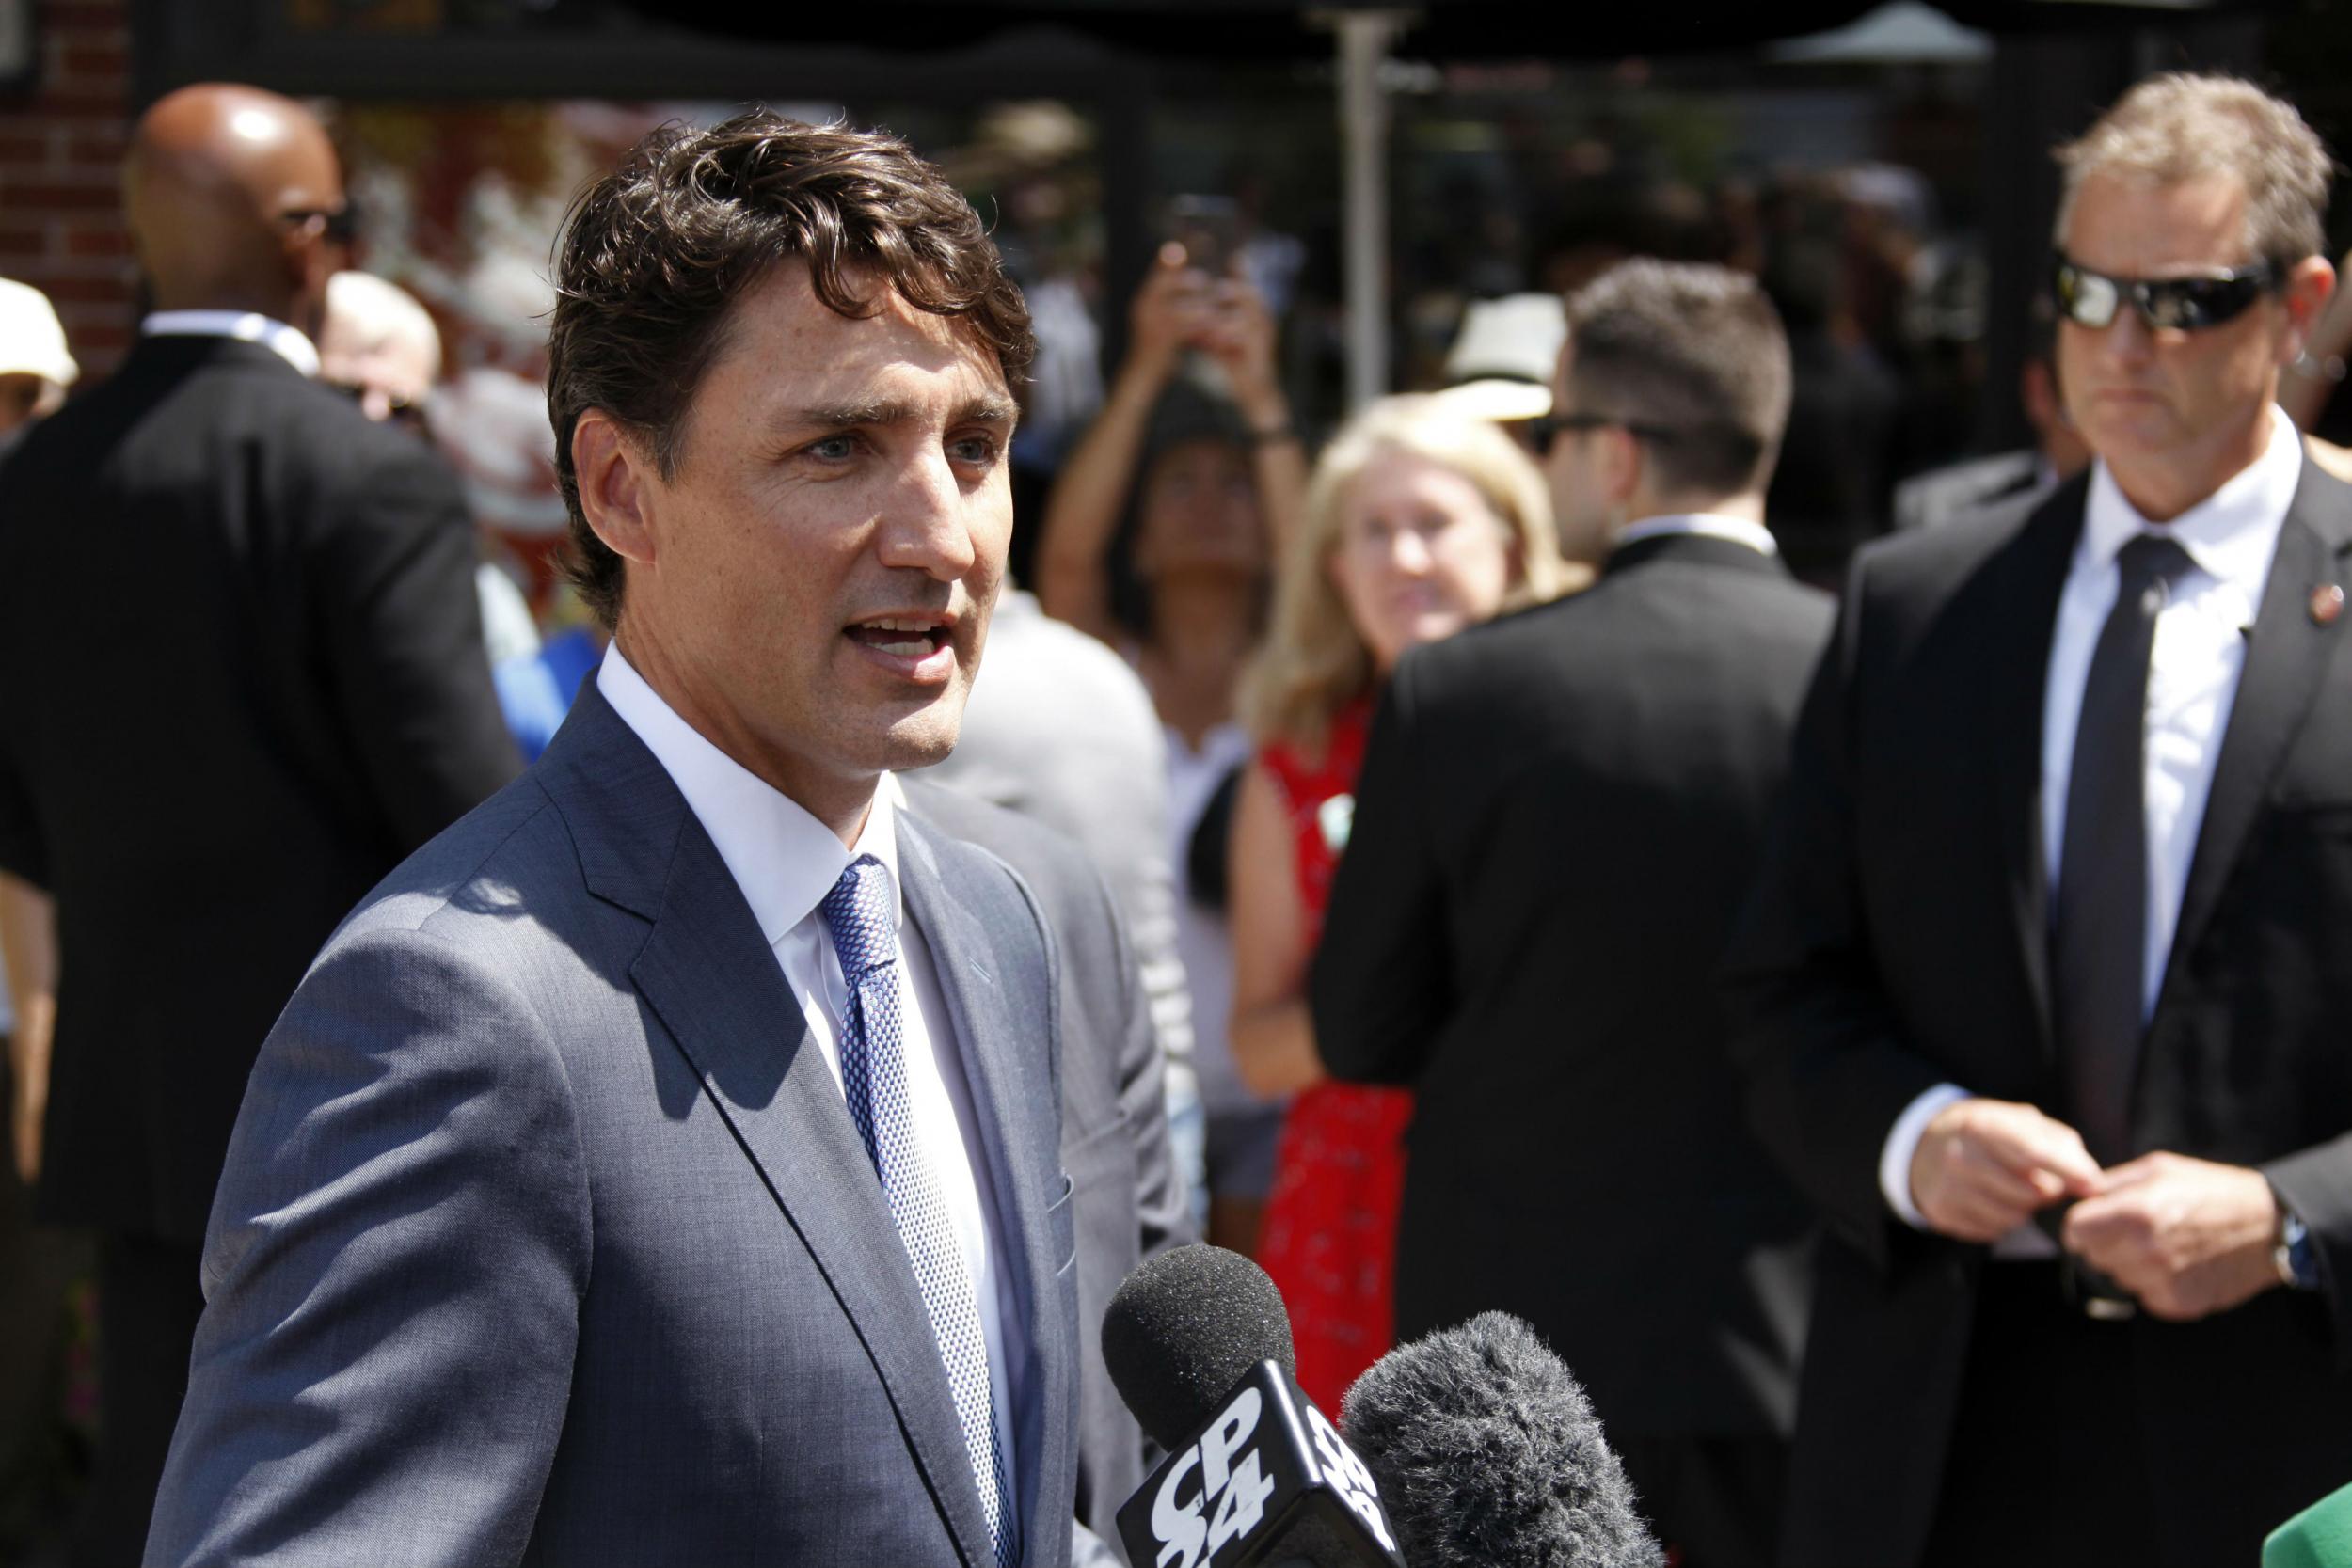 The diplomatic spat has caused a headache for Prime Minister Justin Trudeau's government